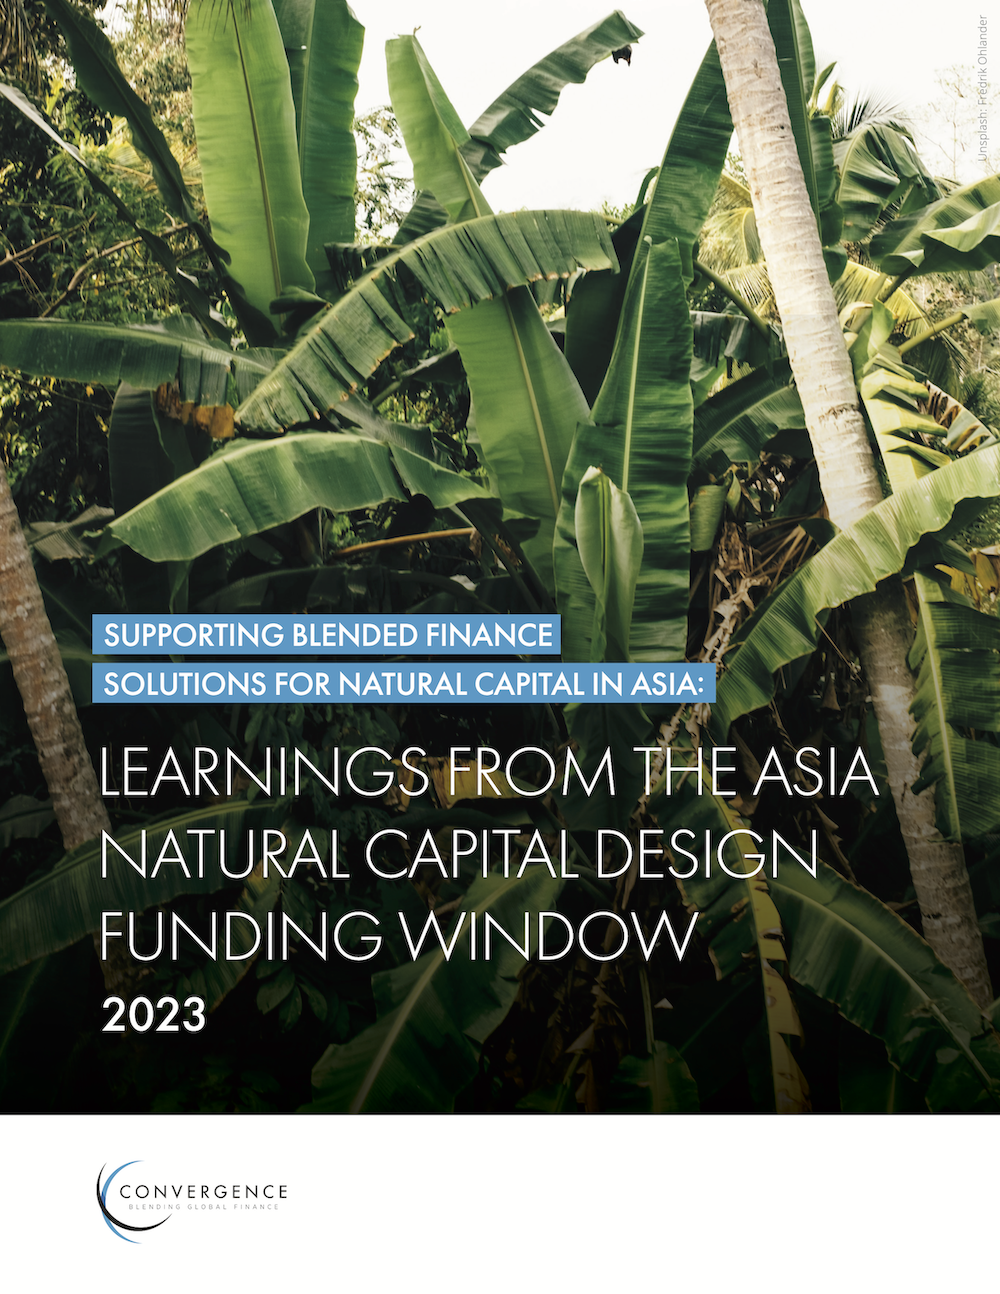 Supporting Blended Finance Solutions for Natural Capital in Asia: Learnings from the Asia Natural Capital Design Funding Window